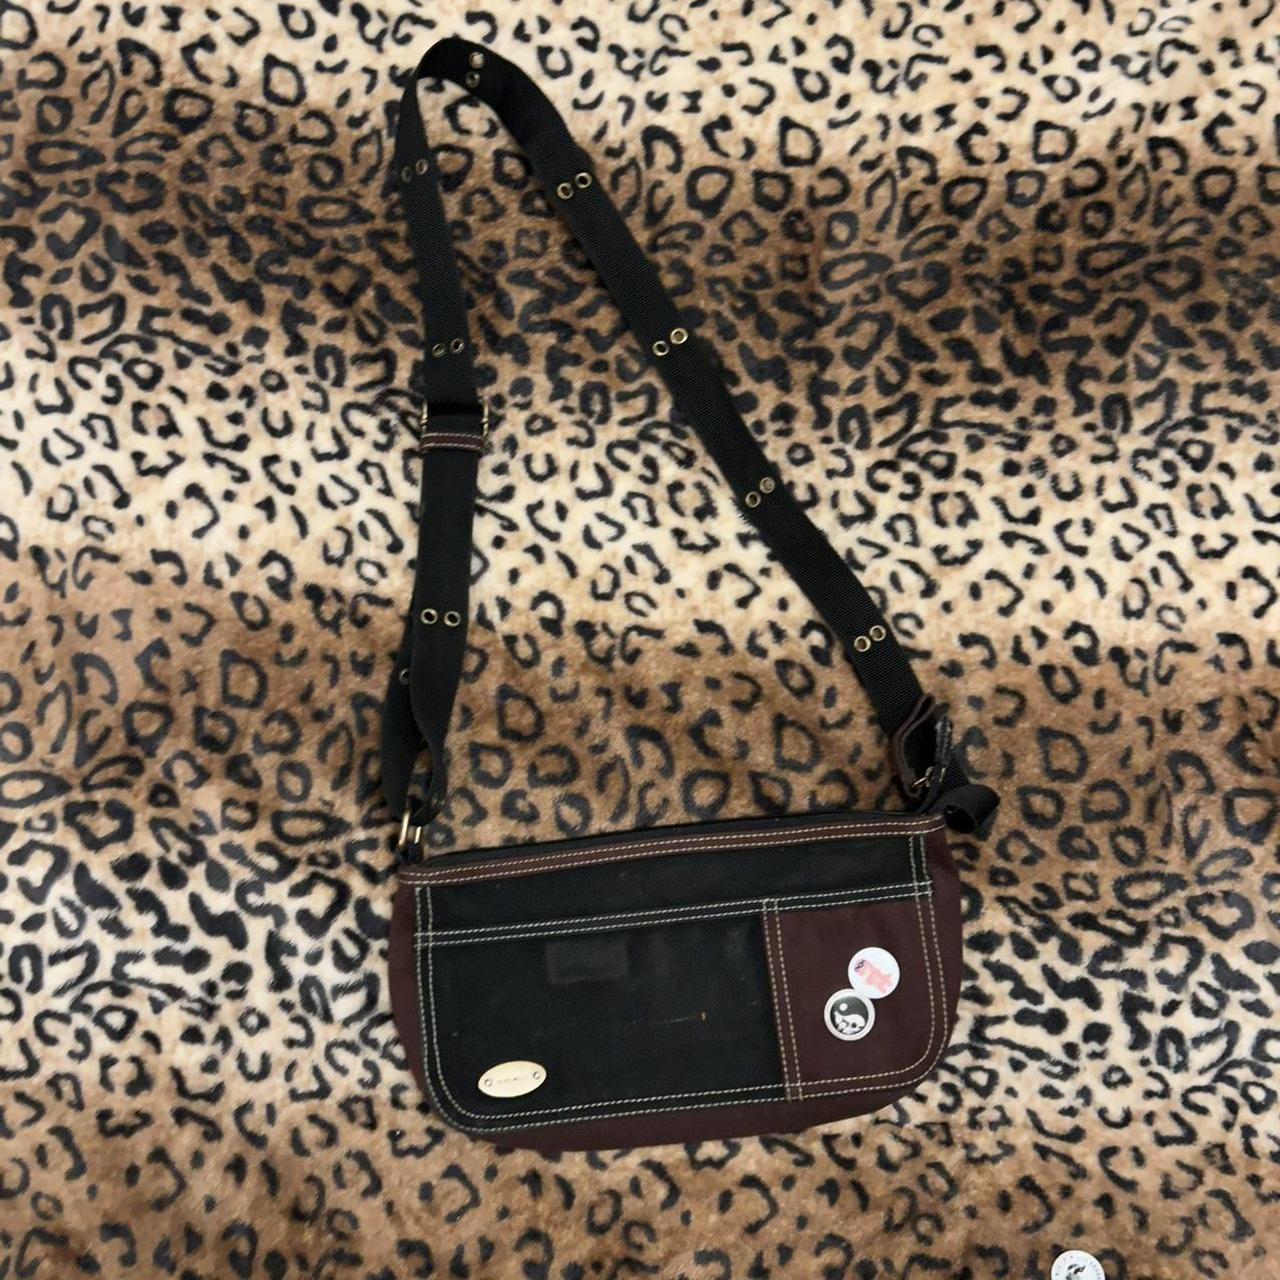 Thelma and Louise inspired best friend bag - Depop